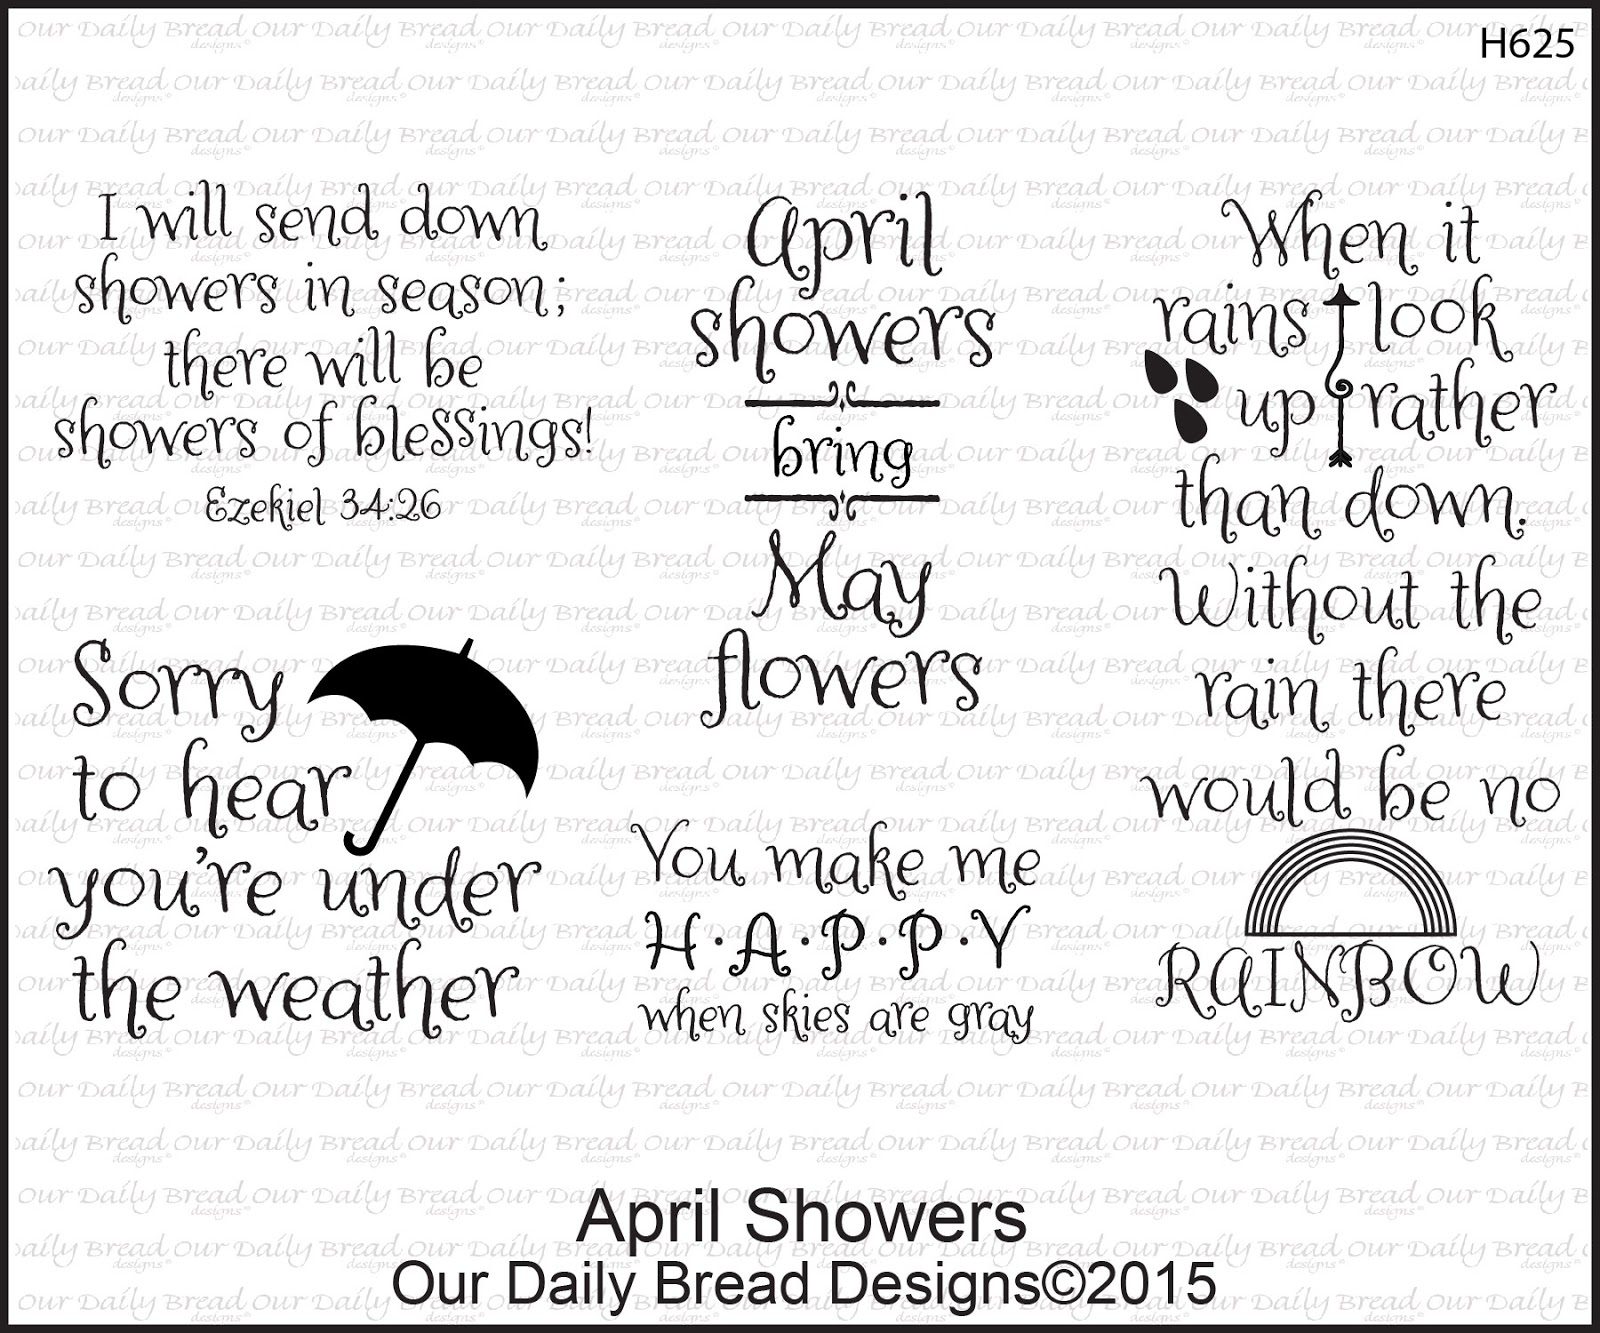 https://www.ourdailybreaddesigns.com/index.php/h625-april-showers.html